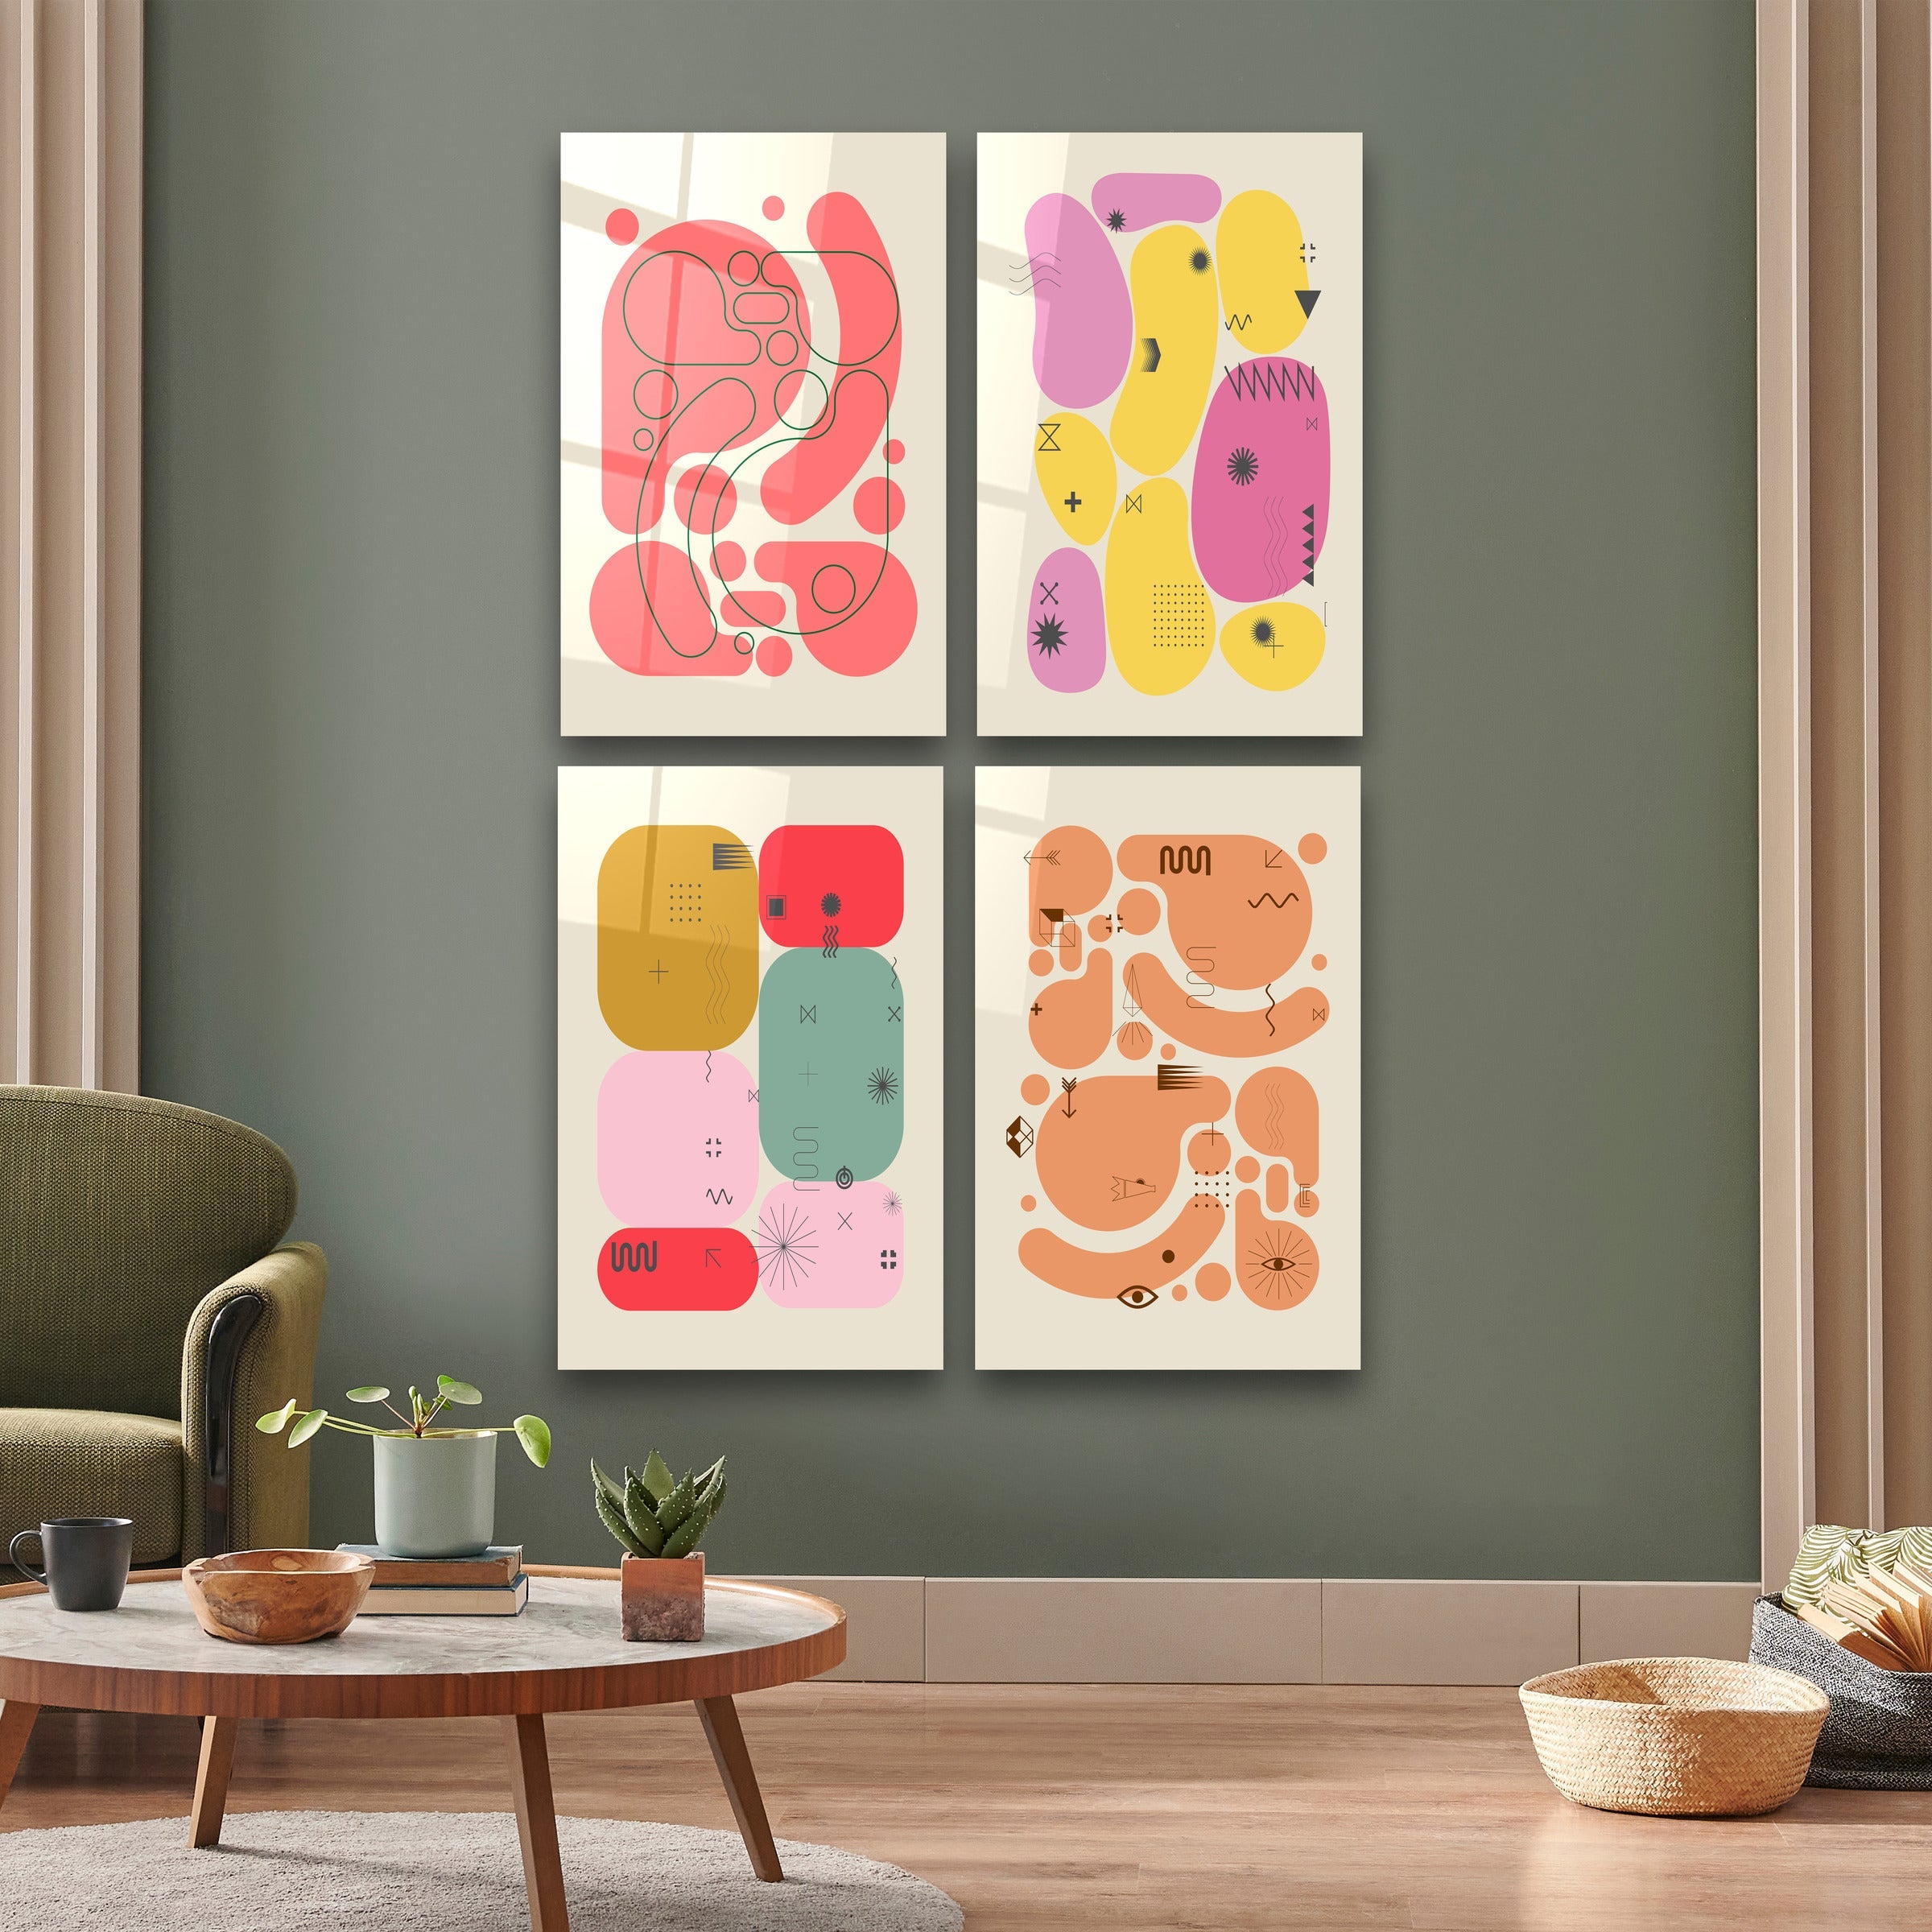 ."Abstract Quadro". Contemporary Gallery Collection Glass Wall Art